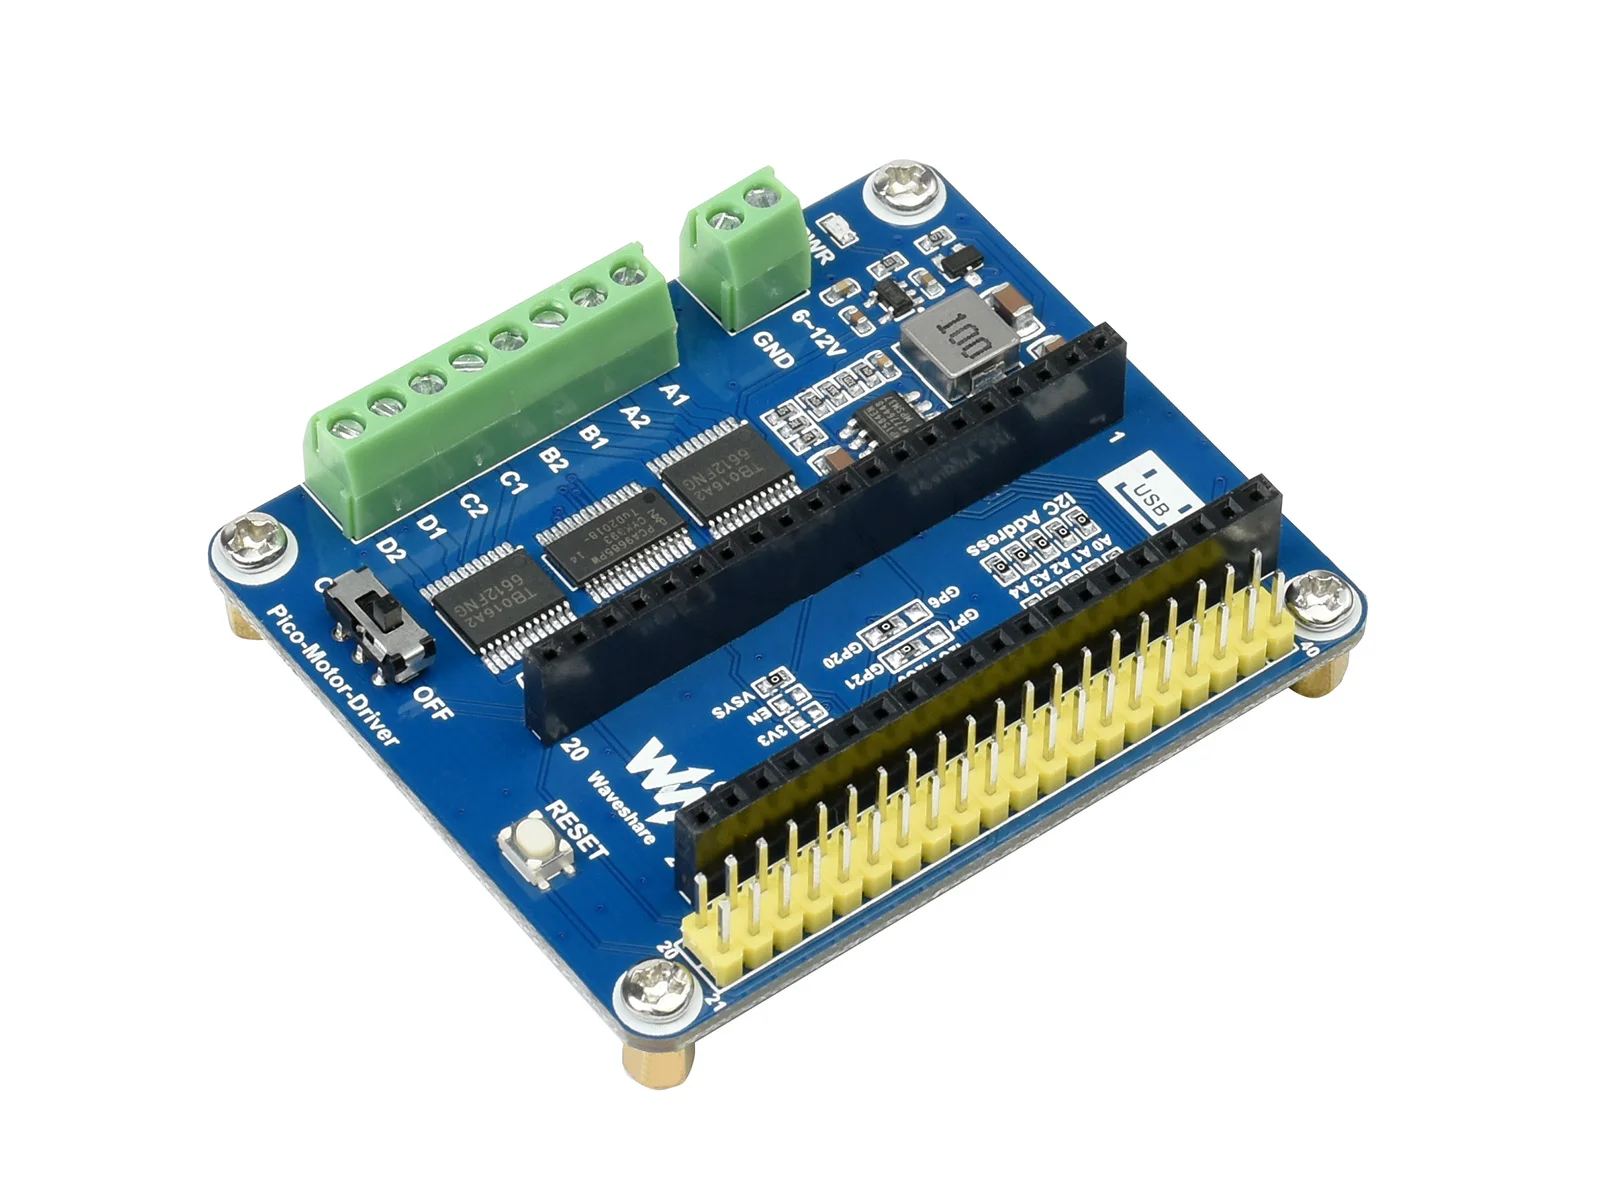 

Pico-Motor-Driver,DC Motor Driver Module For Raspberry Pi Pico, Driving Up To 4x DC Motors,Suitable For 2WD Or 4WD Driving